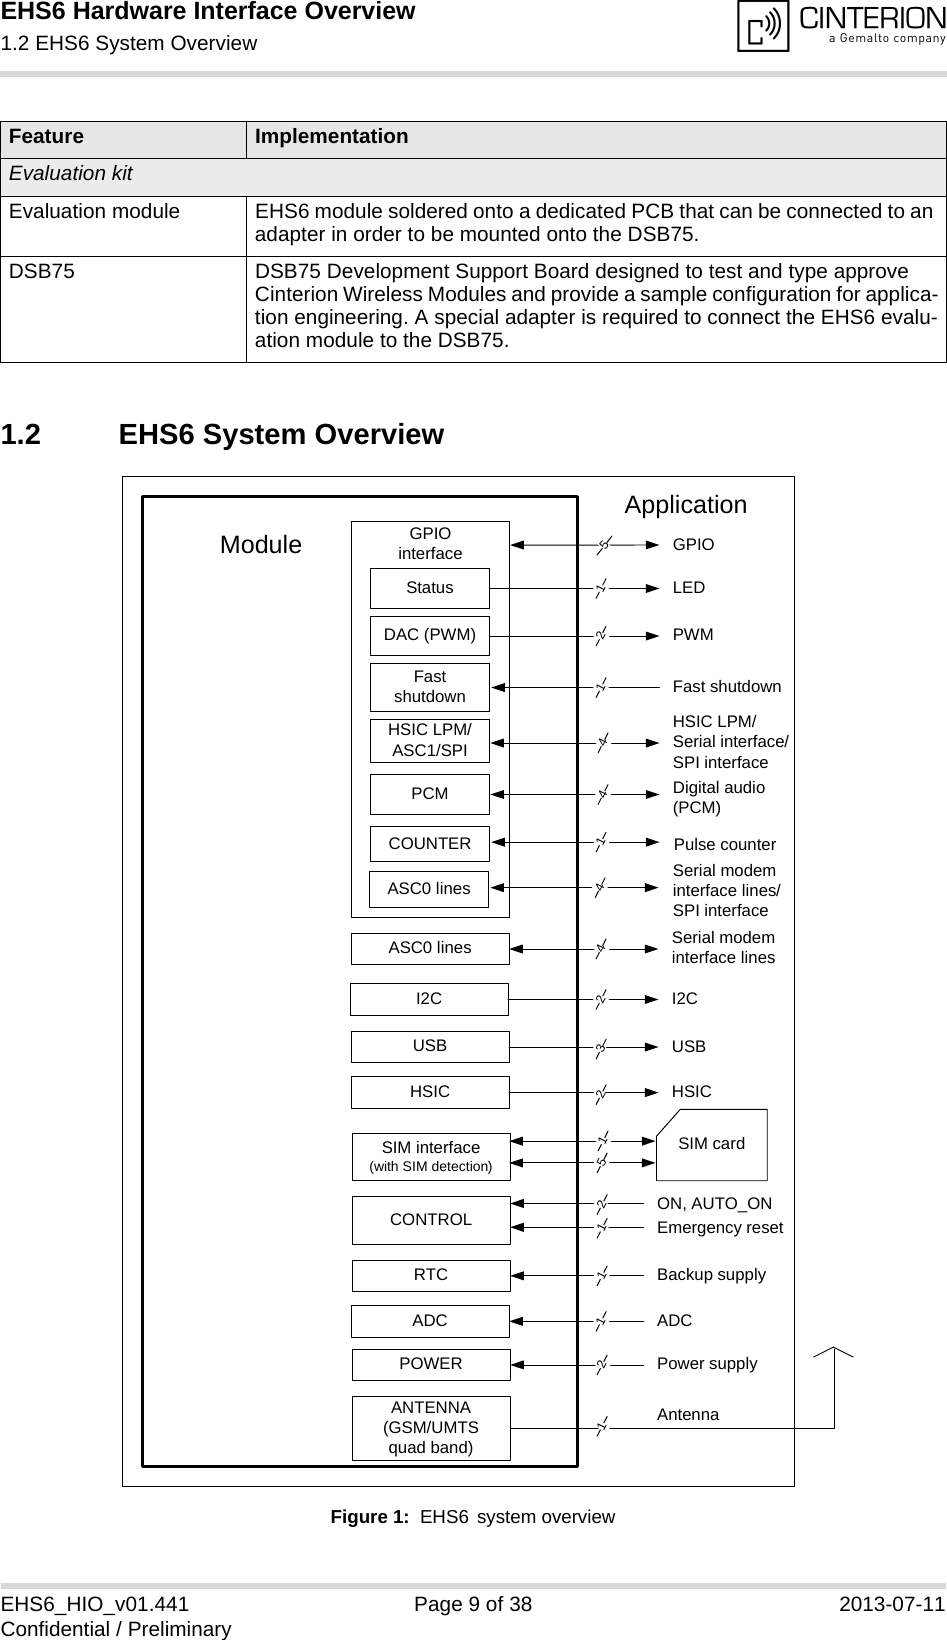 EHS6 Hardware Interface Overview1.2 EHS6 System Overview9EHS6_HIO_v01.441 Page 9 of 38 2013-07-11Confidential / Preliminary1.2 EHS6 System OverviewFigure 1:  EHS6 system overviewEvaluation kitEvaluation module EHS6 module soldered onto a dedicated PCB that can be connected to an adapter in order to be mounted onto the DSB75.DSB75 DSB75 Development Support Board designed to test and type approve Cinterion Wireless Modules and provide a sample configuration for applica-tion engineering. A special adapter is required to connect the EHS6 evalu-ation module to the DSB75.Feature ImplementationGPIO interfaceI2CUSBASC0 linesHSIC LPM/ ASC1/SPICONTROLRTCPOWERANTENNA (GSM/UMTS quad band)ModuleSIM interface(with SIM detection)SIM cardApplicationPower supplyBackup supplyEmergency resetON, AUTO_ONHSIC LPM/Serial interface/SPI interfaceSerial modem interface linesI2CGPIO3445252112USBAntenna1PCM Digital audio(PCM)4Status LED1DAC (PWM) PWM2Fast shutdown Fast shutdown11ADC ADC1HSIC2HSICCOUNTER Pulse counter1ASC0 lines Serial modem interface lines/ SPI interface4